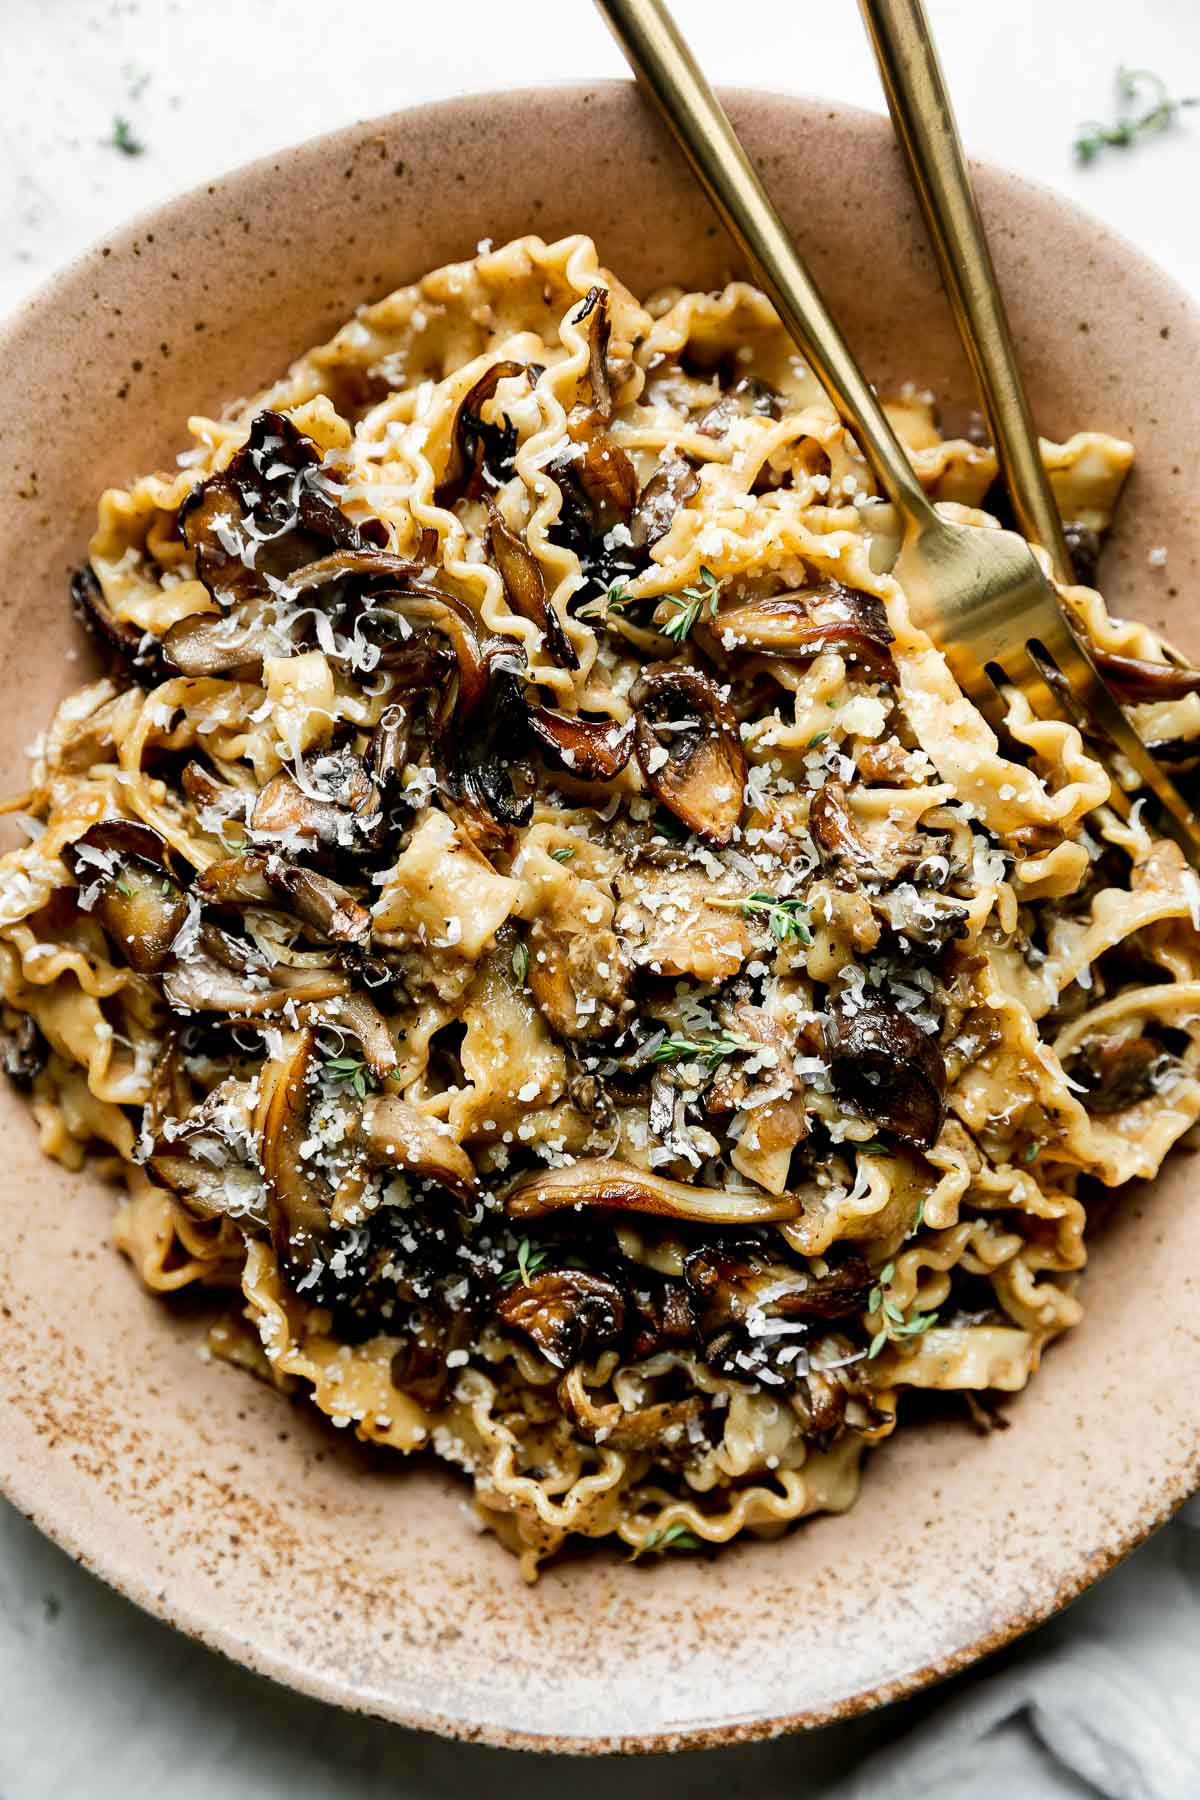 A serving of wild mushroom ragu pasta fills a brown speckled ceramic bowl. The pasta has been garnished with freshly grated parmesan and herbs. The bowl sits atop a creamy white textured surface with a light gray linen napkin resting alongside and few fresh herbs sprinkled loosely nearby. Gold silverware rests inside of the bowl.